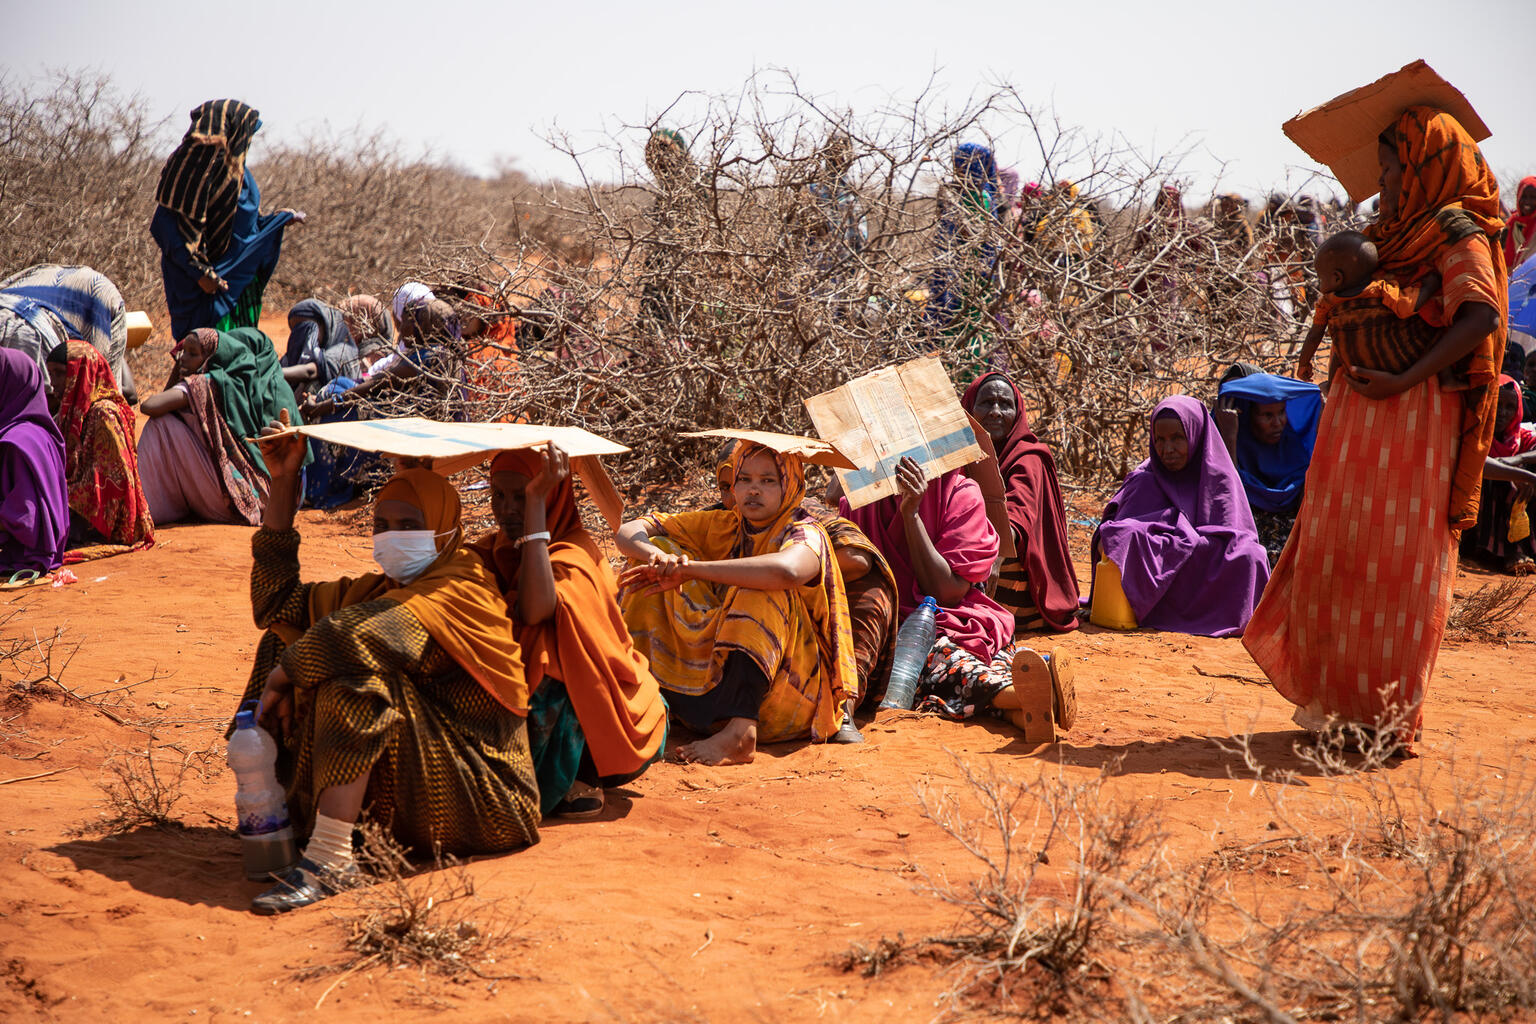 In Hegalle, Somali region in Ethiopia, thousands of men, women and children are queuing in the sweltering heat waiting to be registered and receive humanitarian aid.